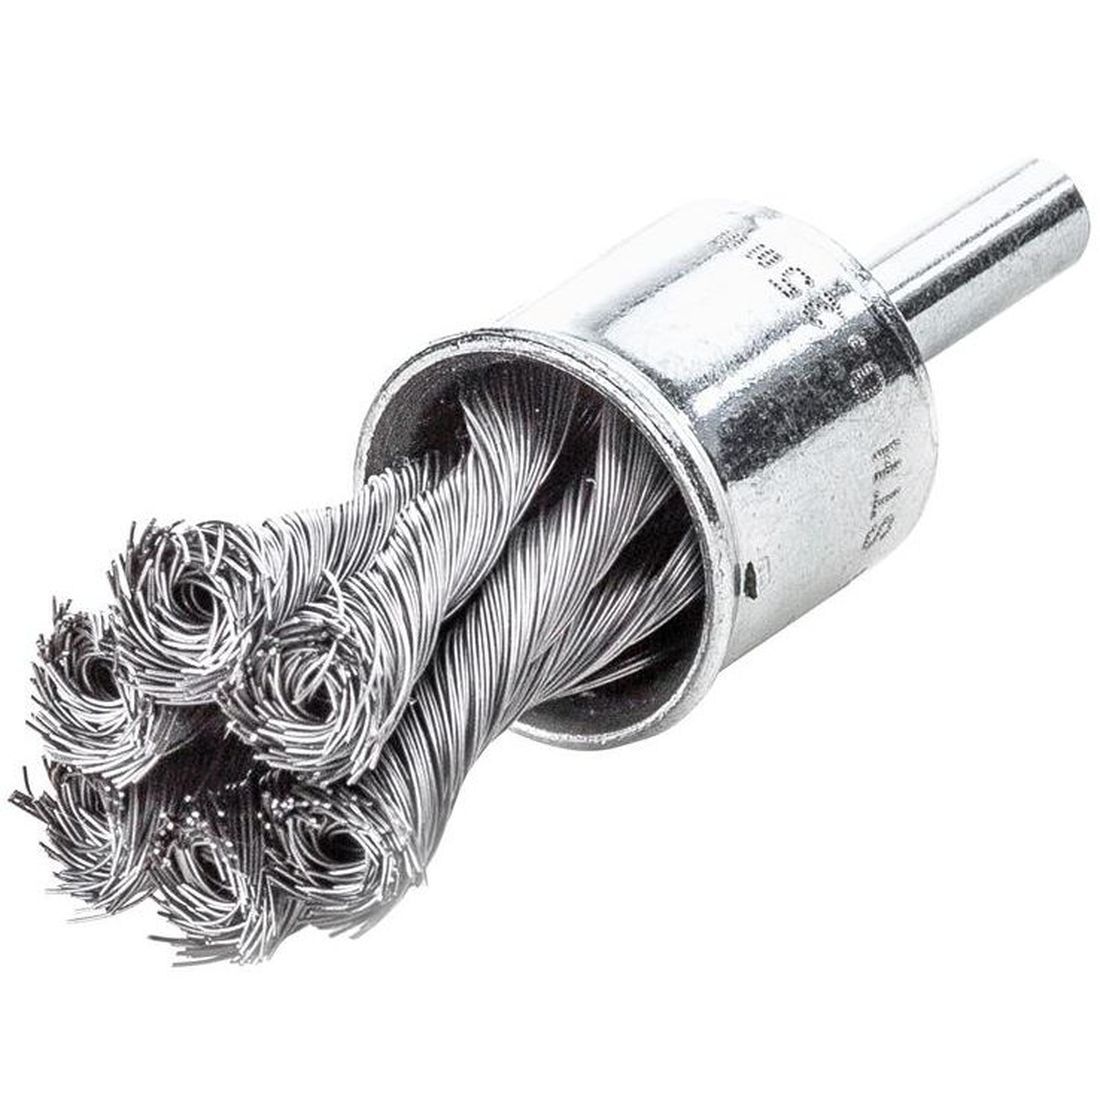 Lessmann Knot End Brush with Shank 29mm, 0.35 Steel Wire                                 